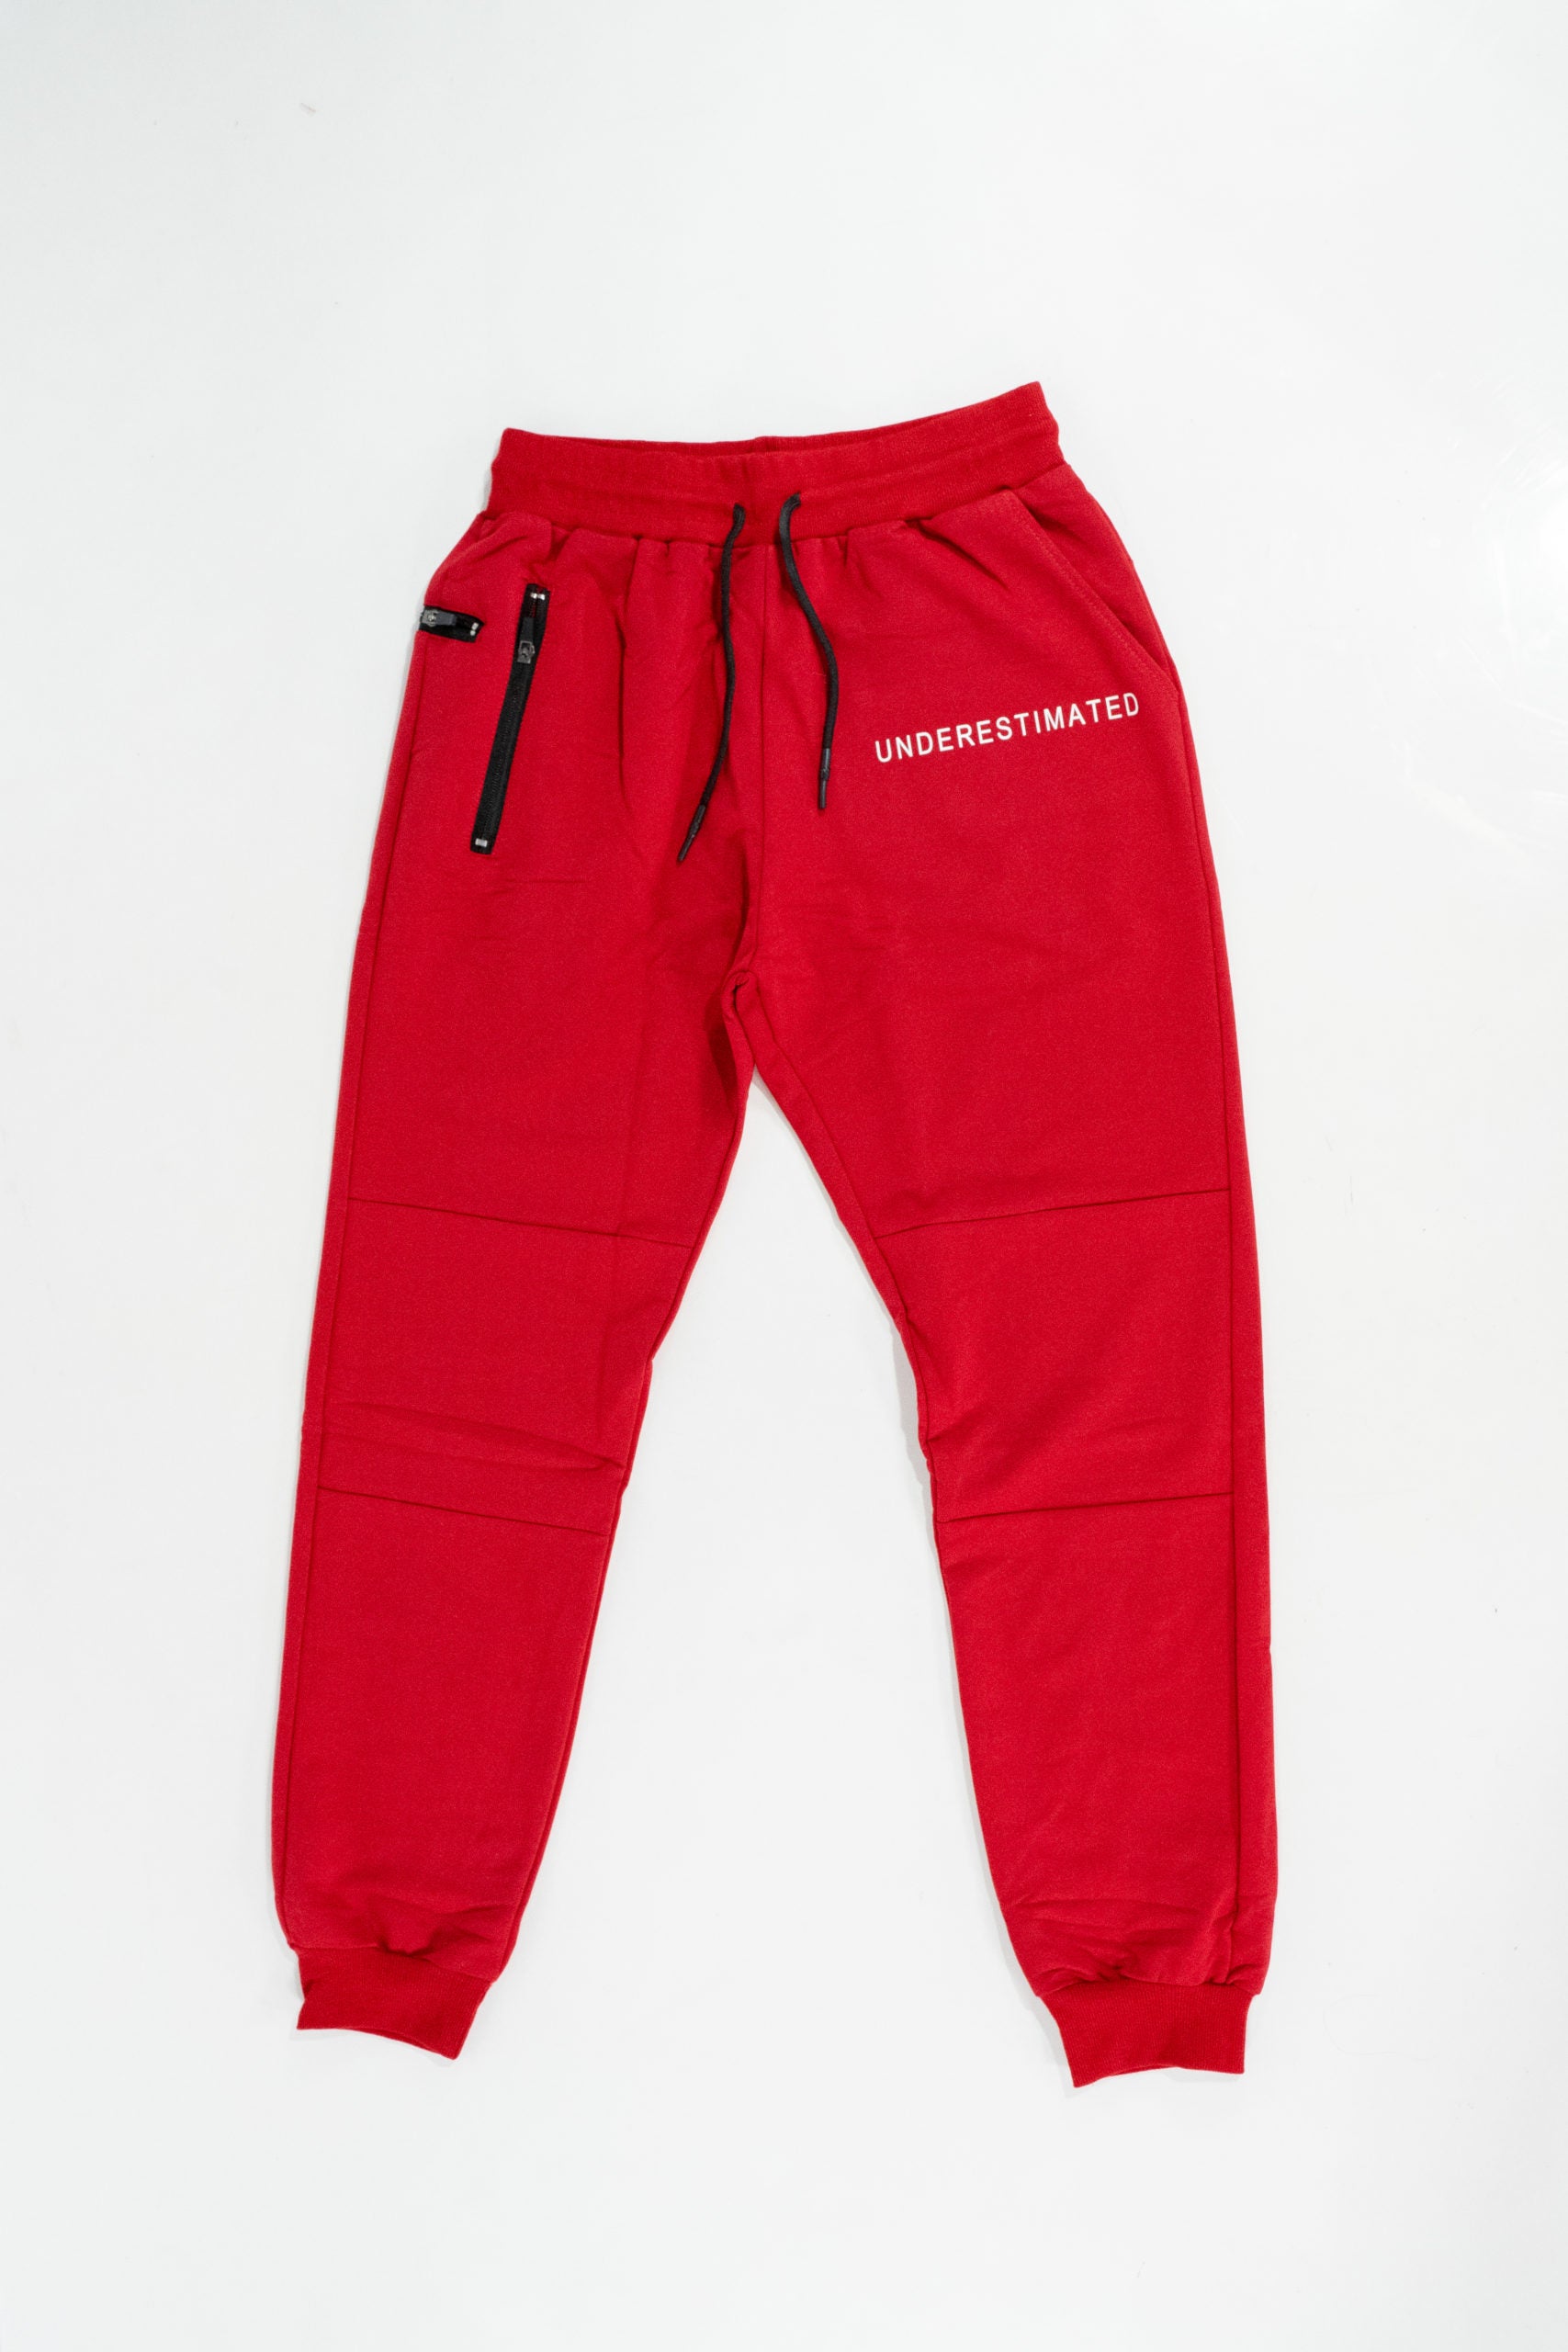 Front view of championship red elite jogger pants